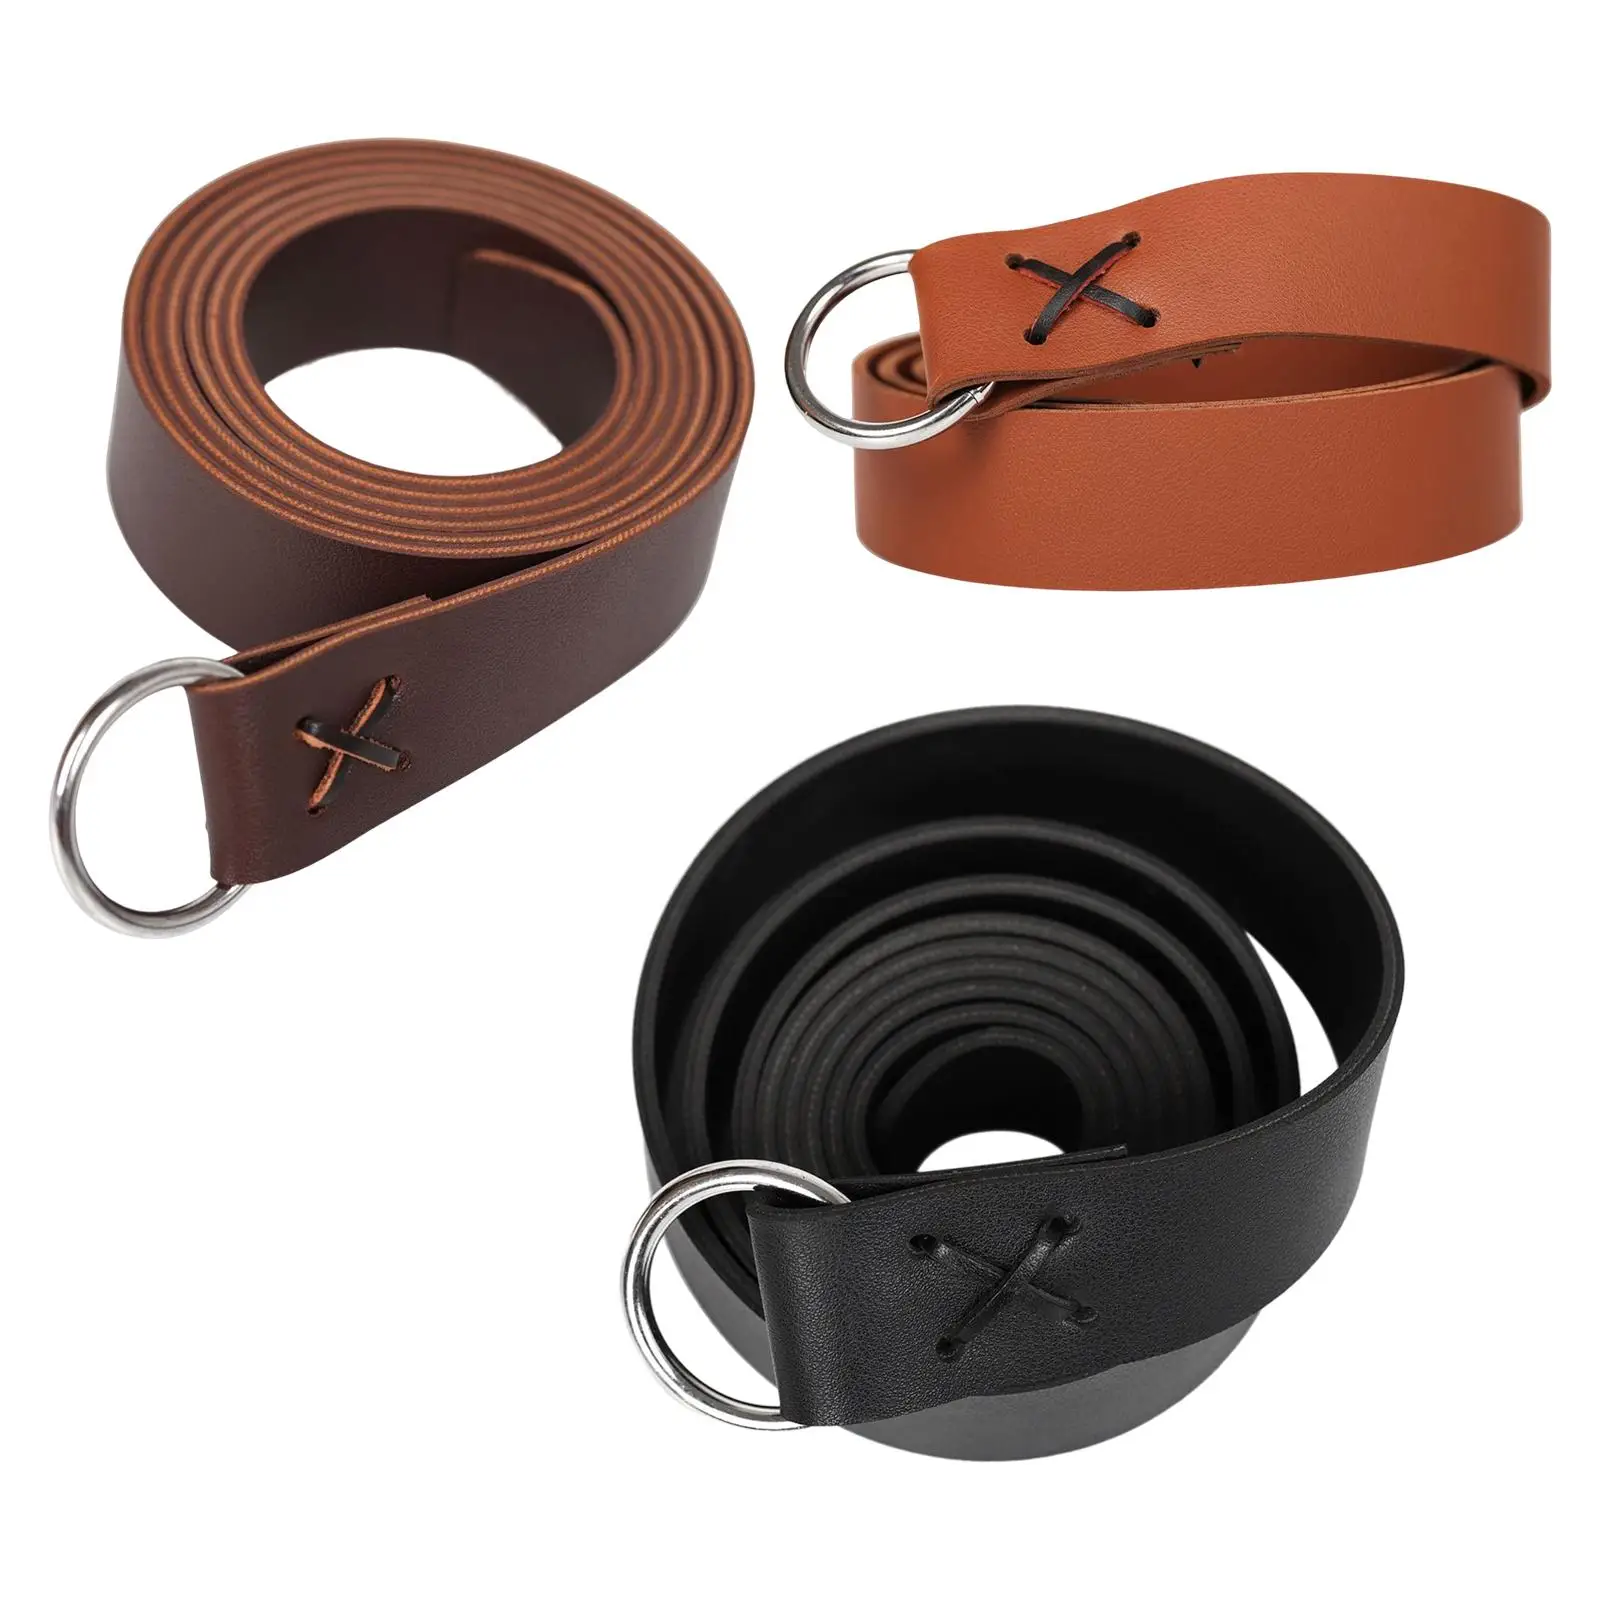 Leather Medieval Belt Costume Accessories Waistband Viking Belt for Halloween Stage Performances Medieval Events Decoration